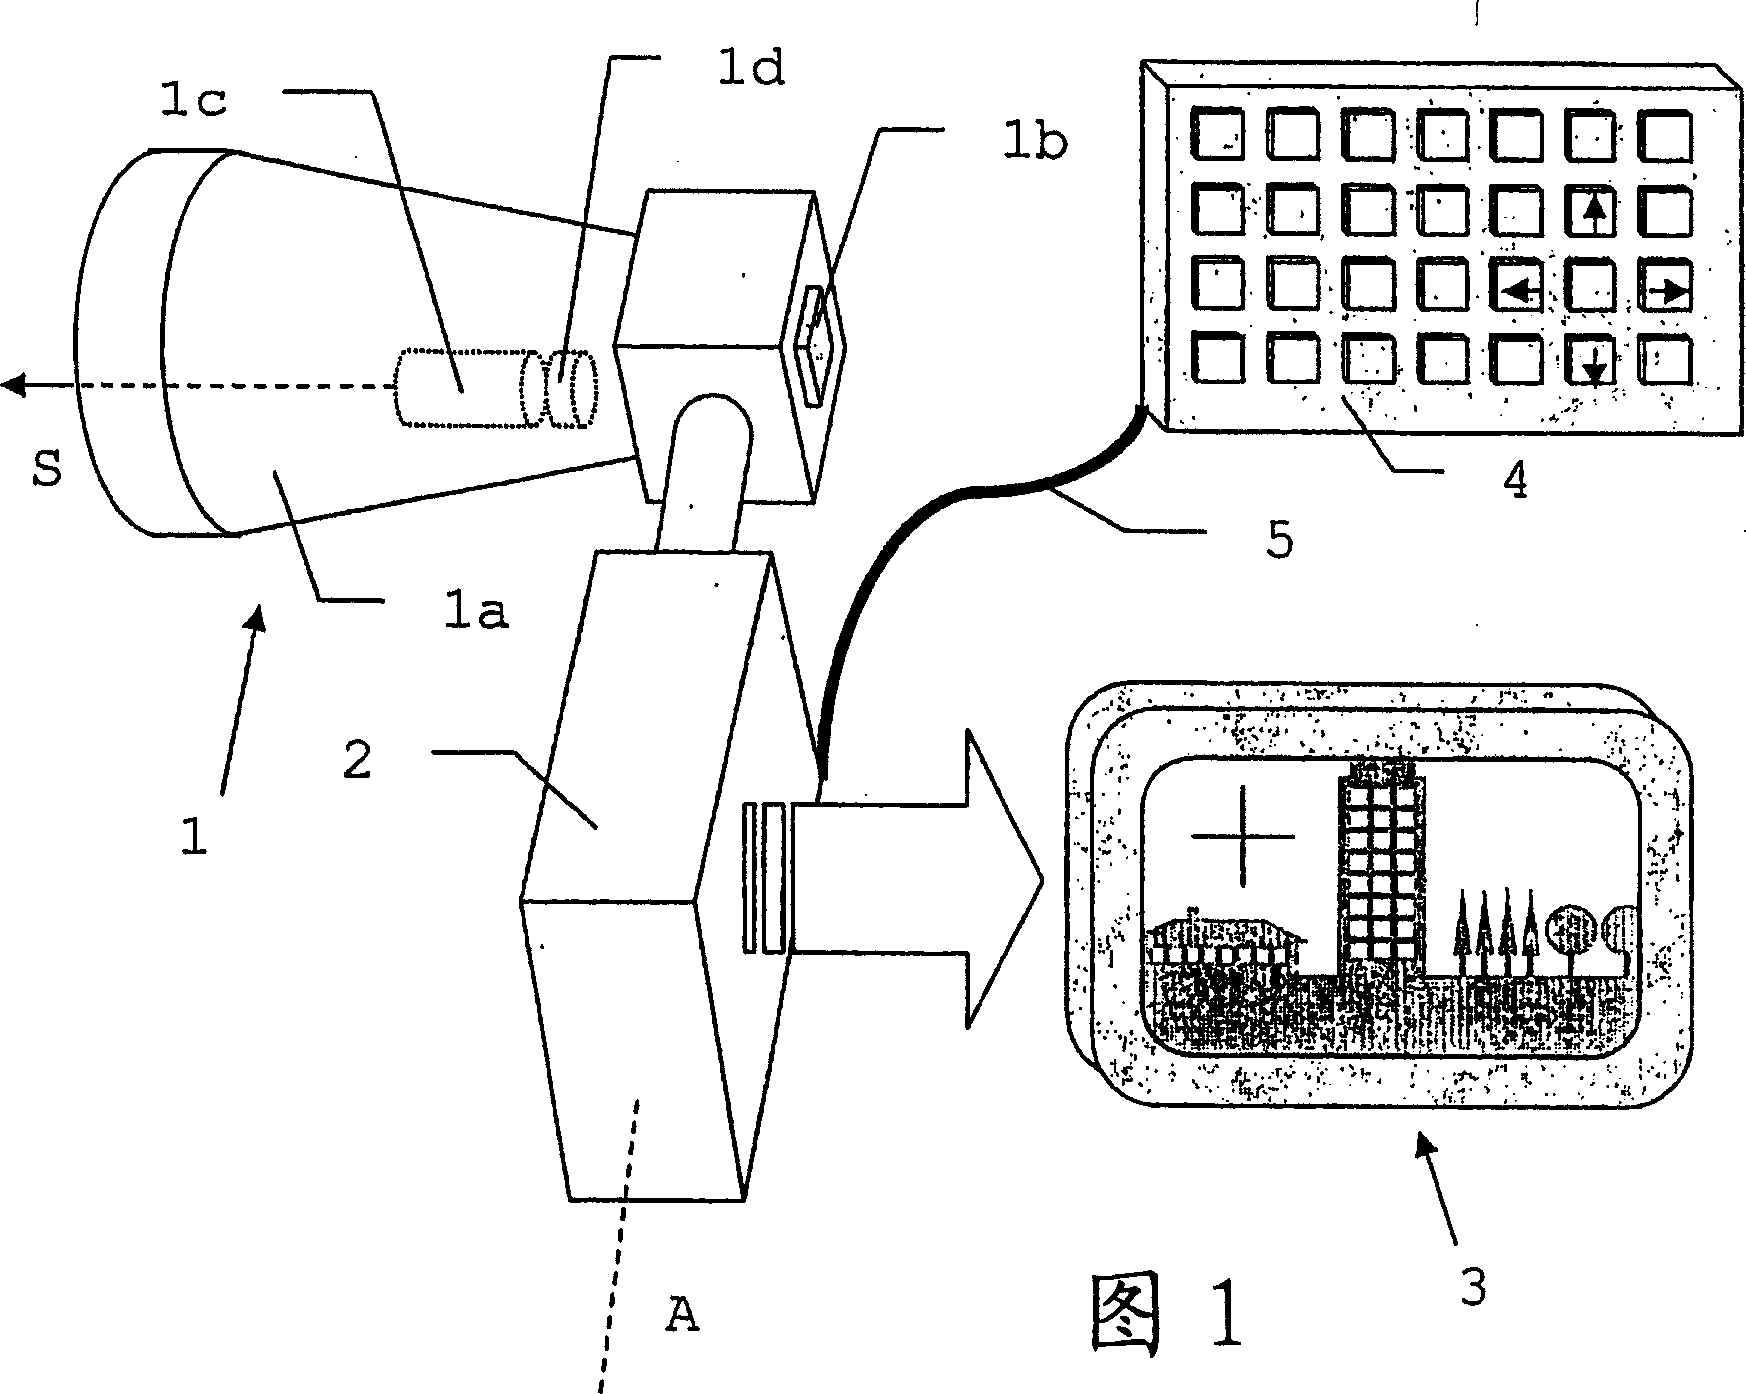 Electronic display and control device for a measuring instrument